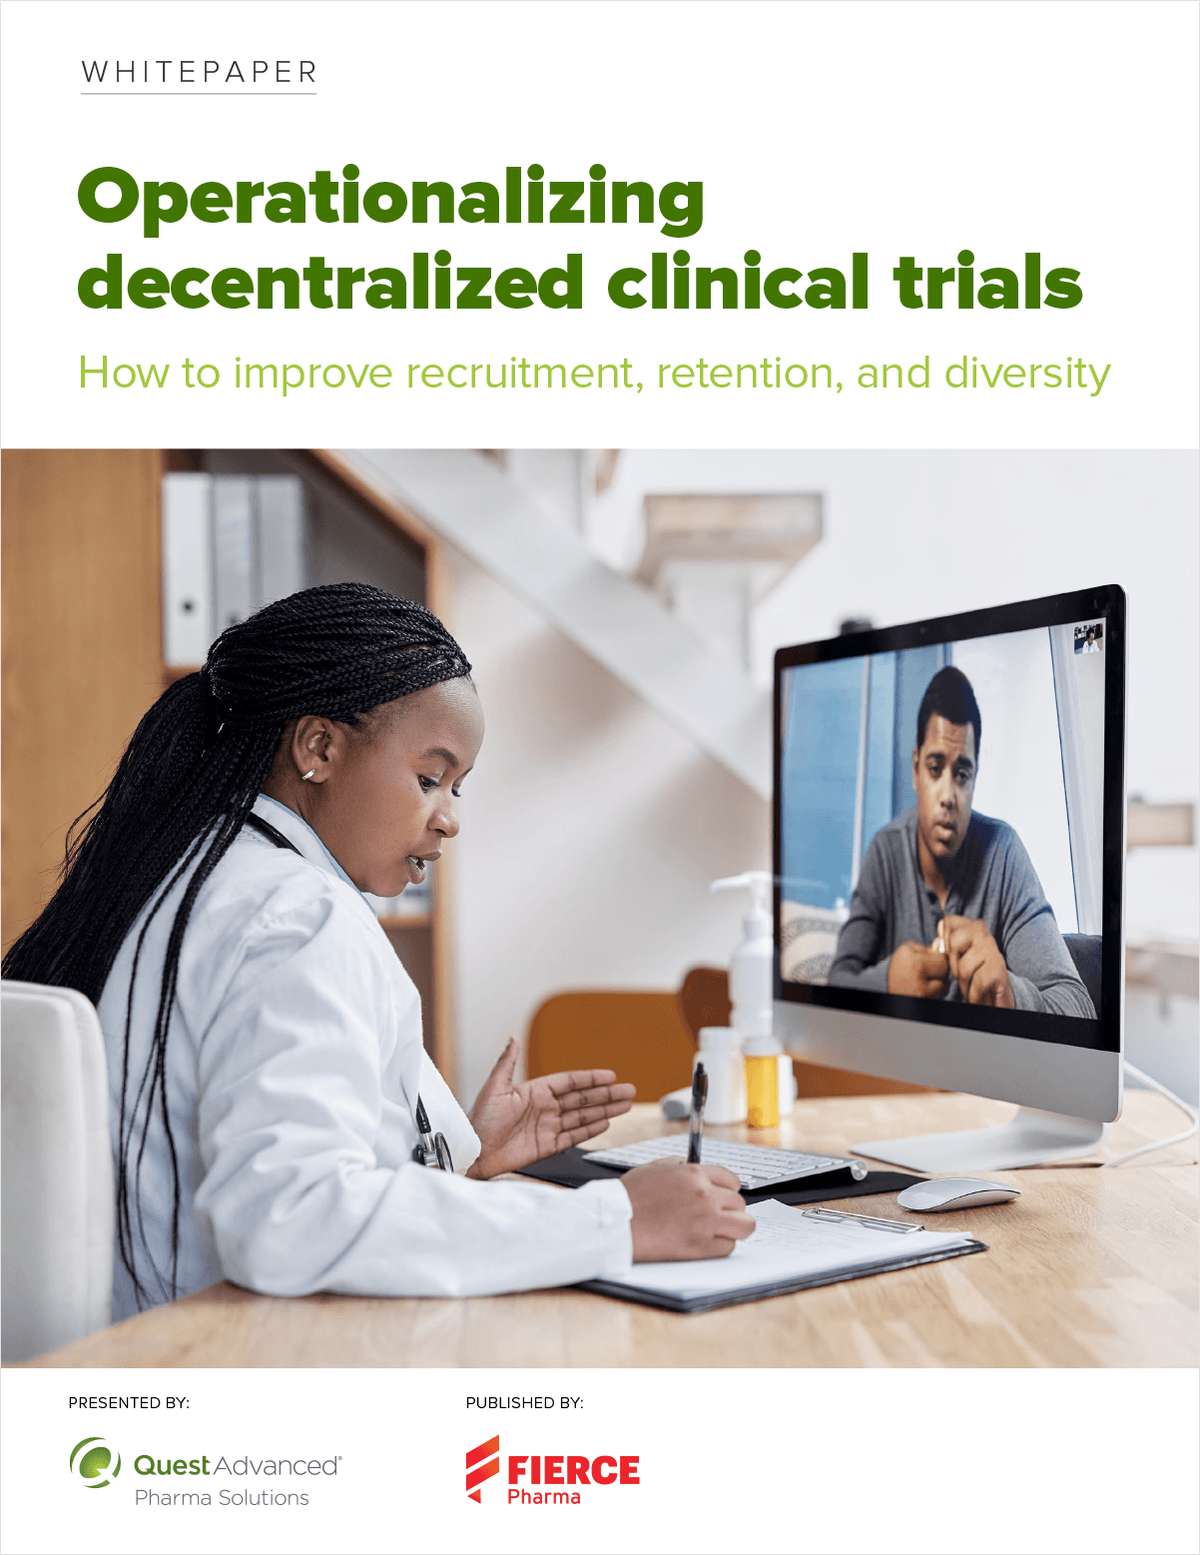 Operationalizing decentralized clinical trials